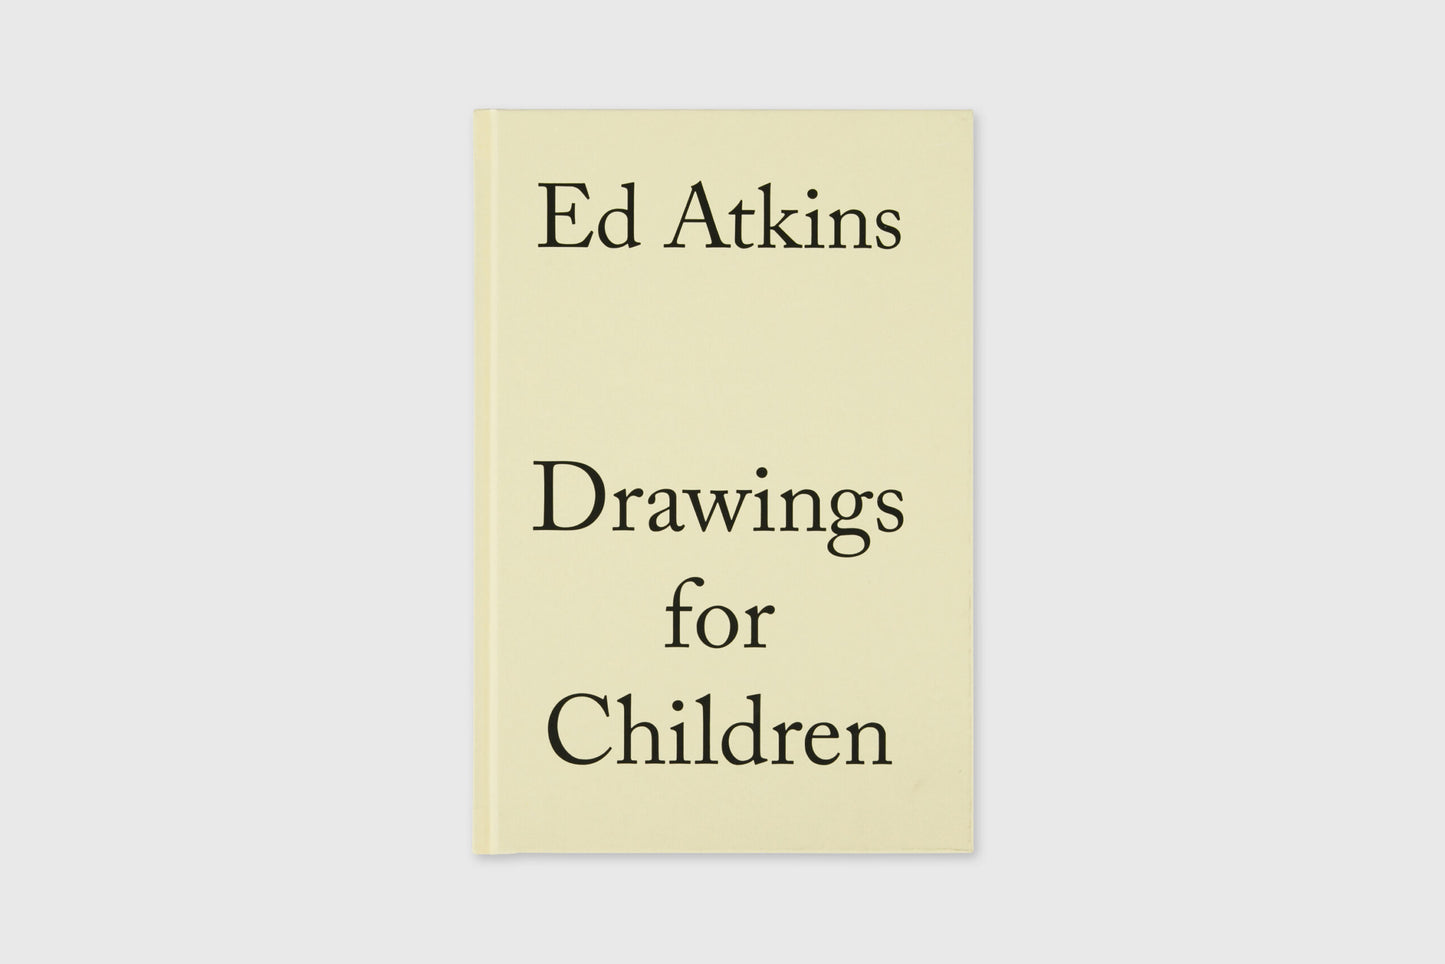 Drawings for Children